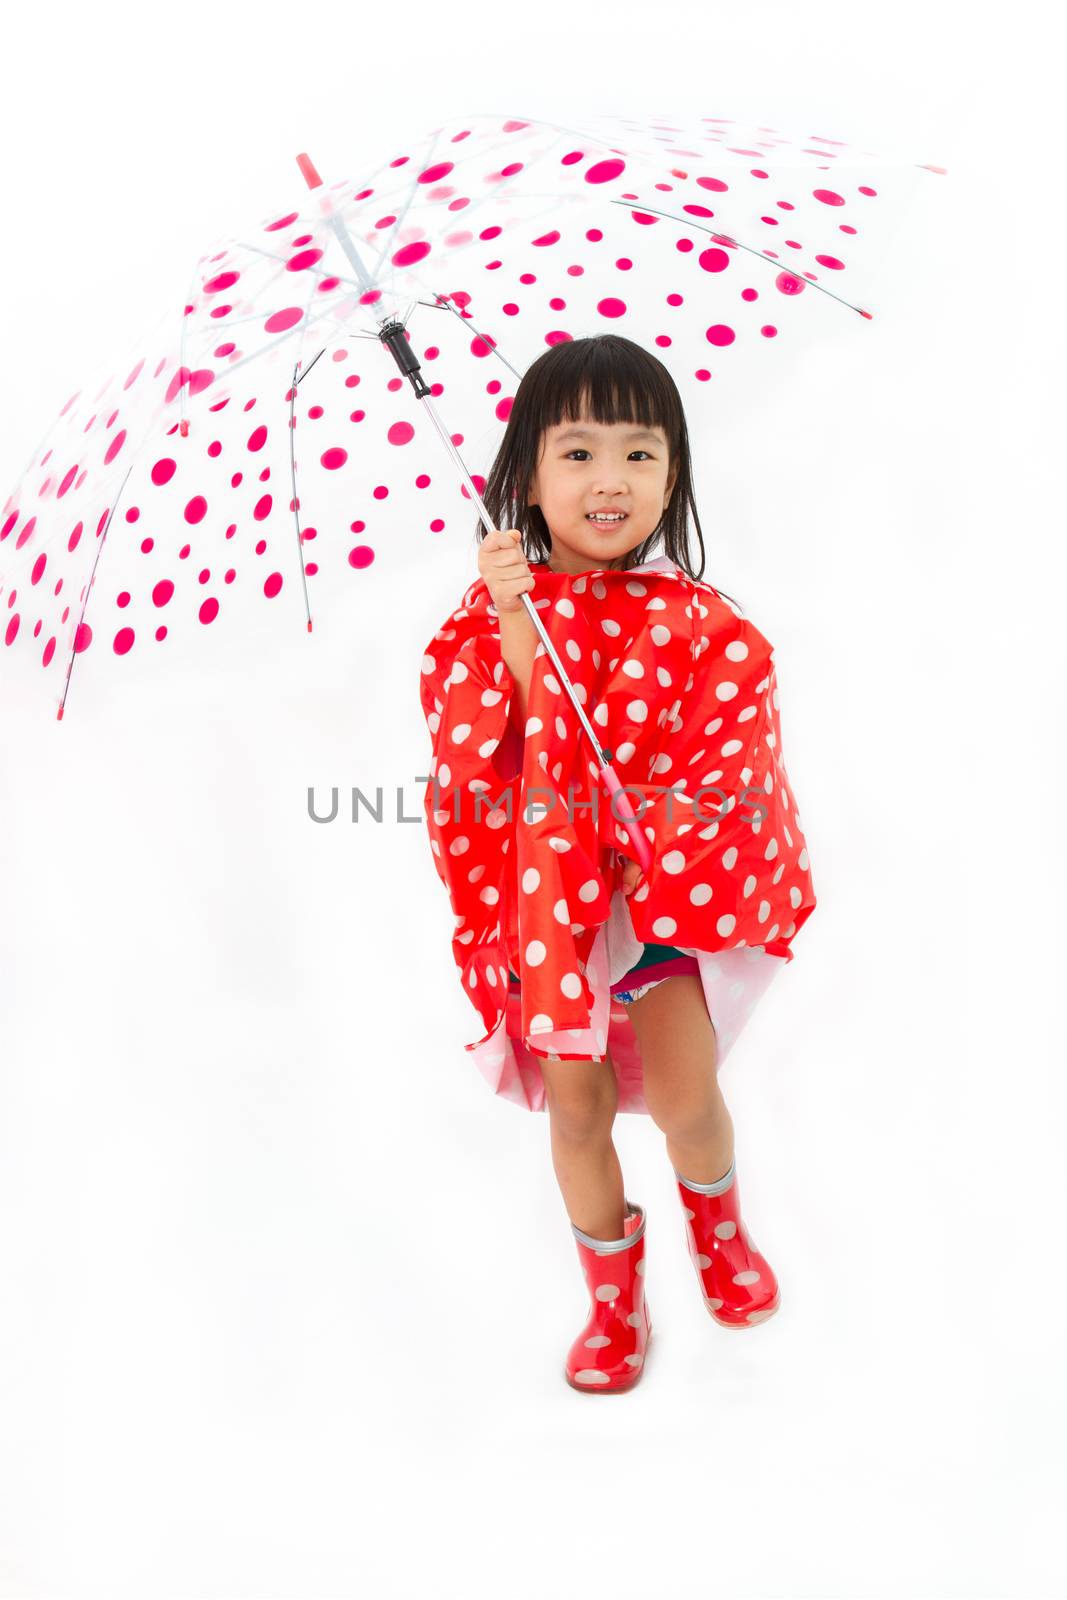 Chinese Little Girl Holding umbrella with raincoat by kiankhoon